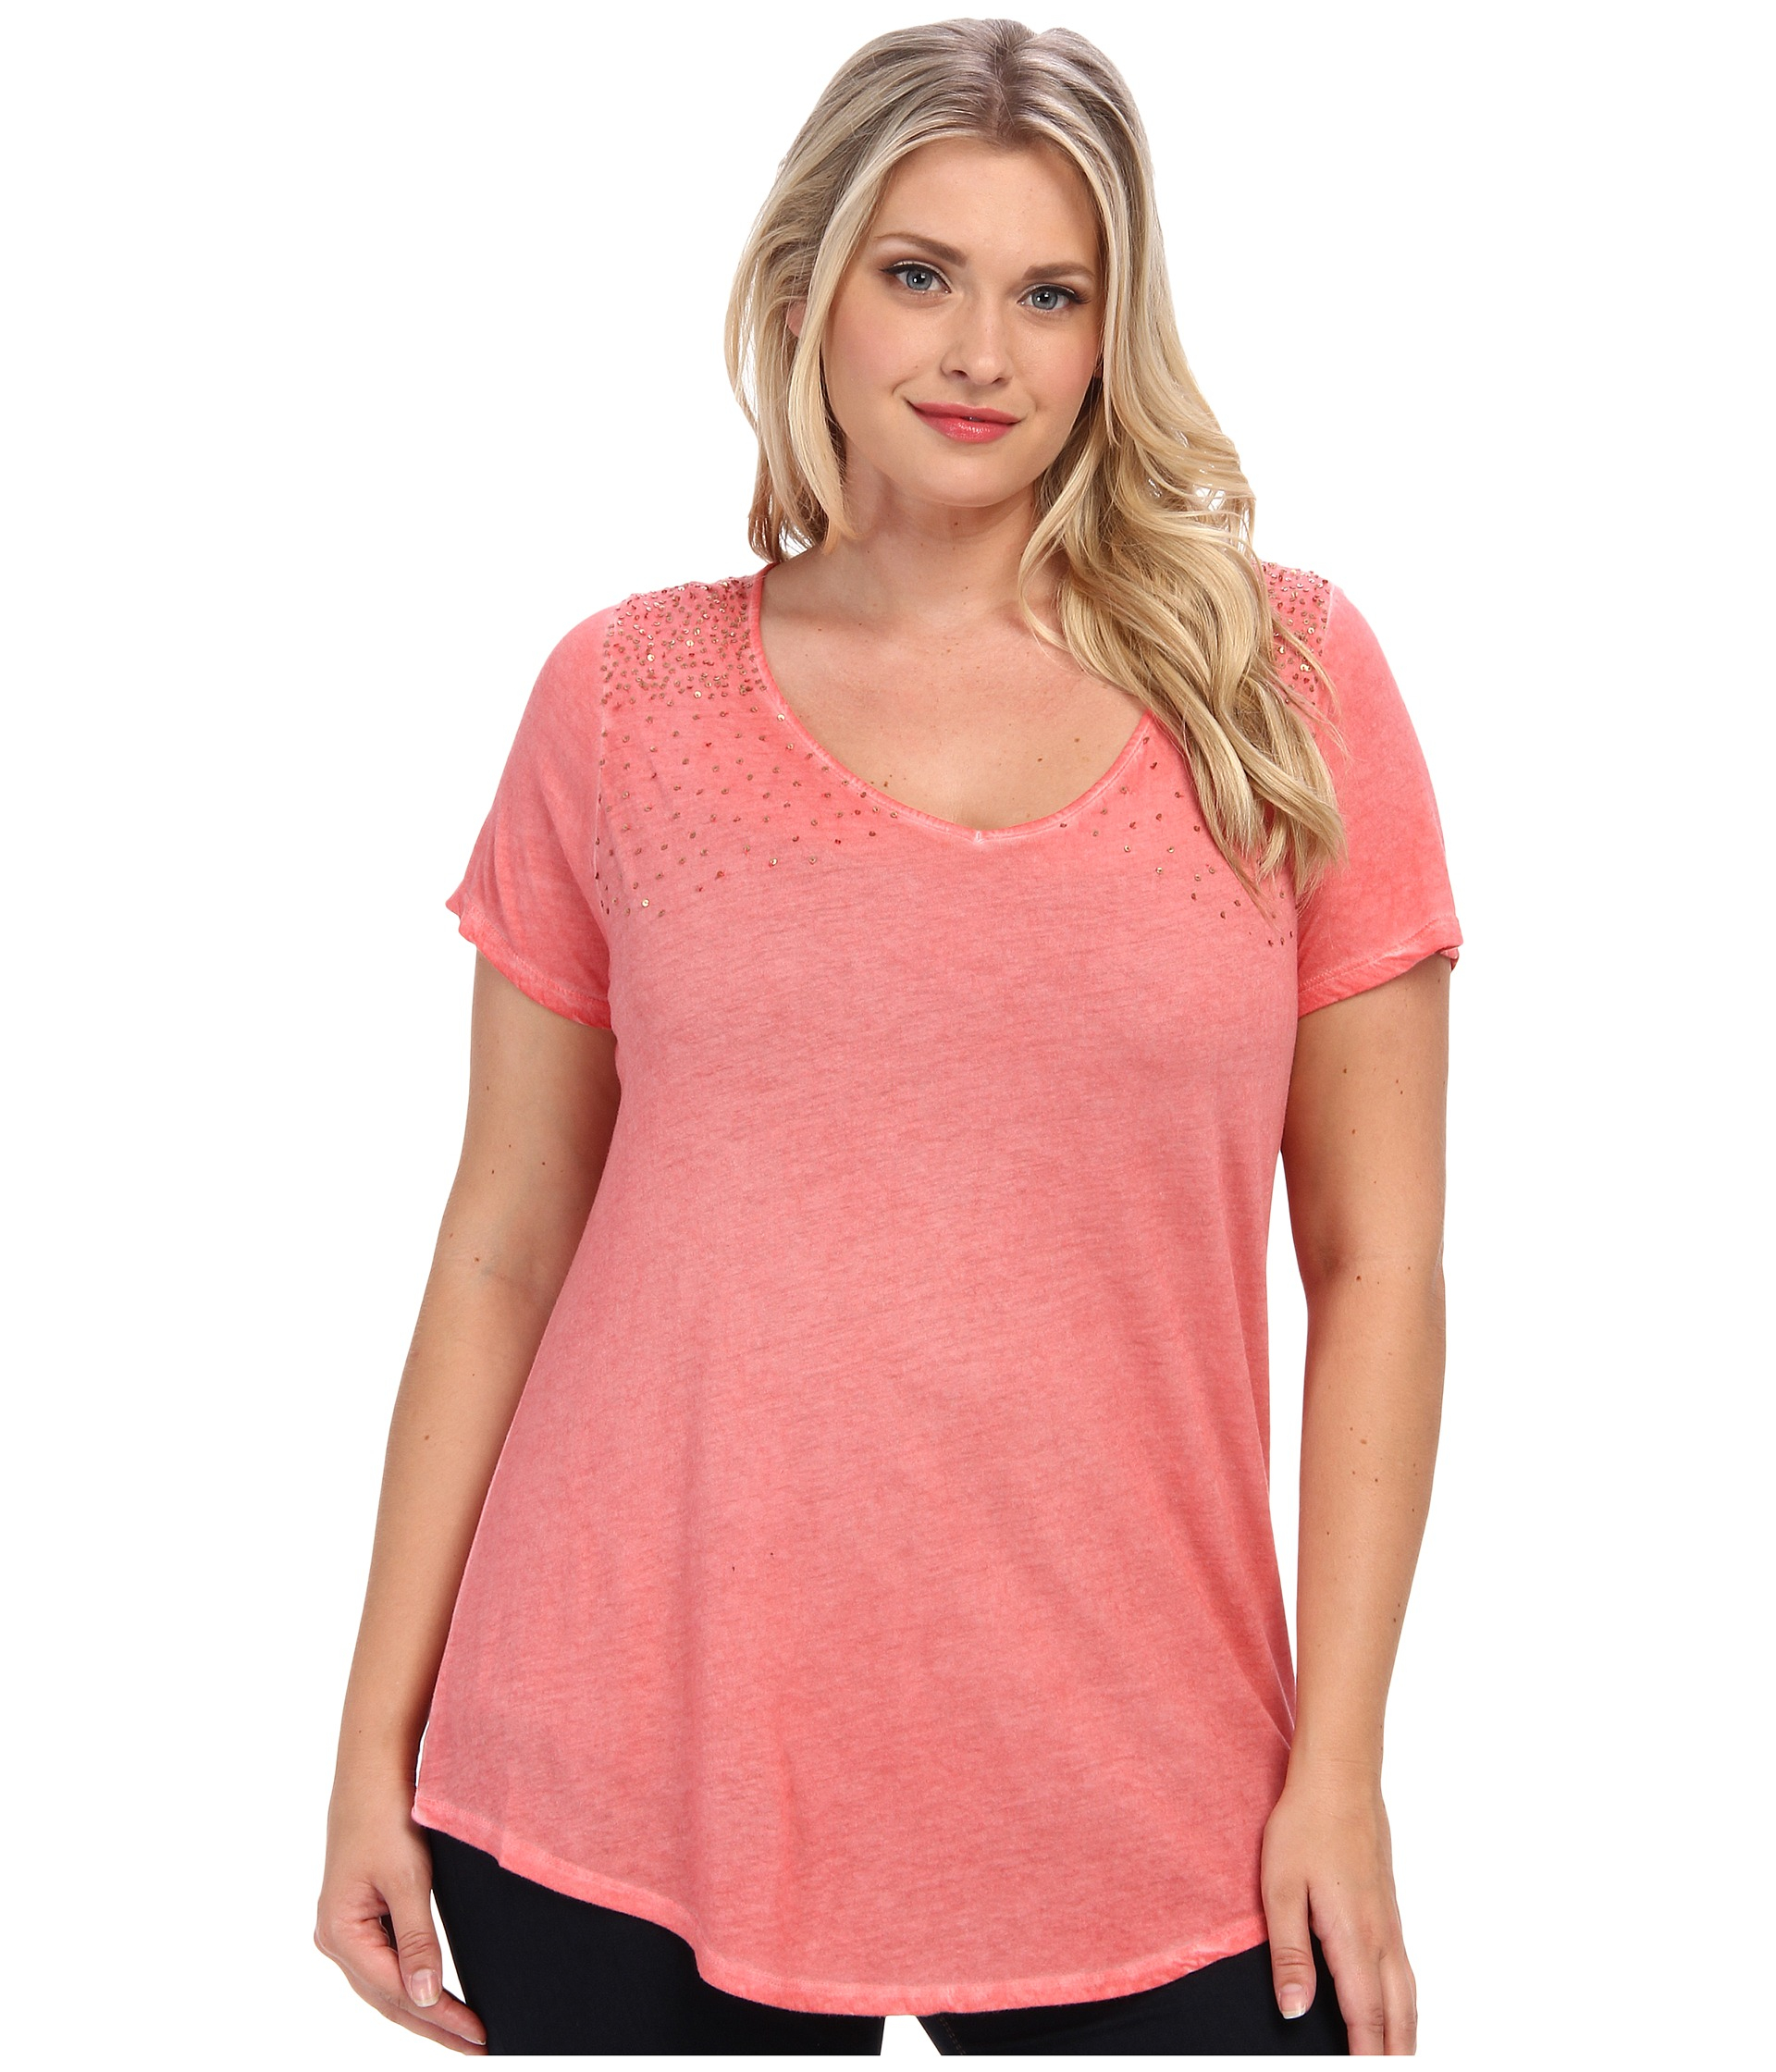 Dkny Plus Size Sequin Embellished Tee in Pink (Tigerlily) | Lyst